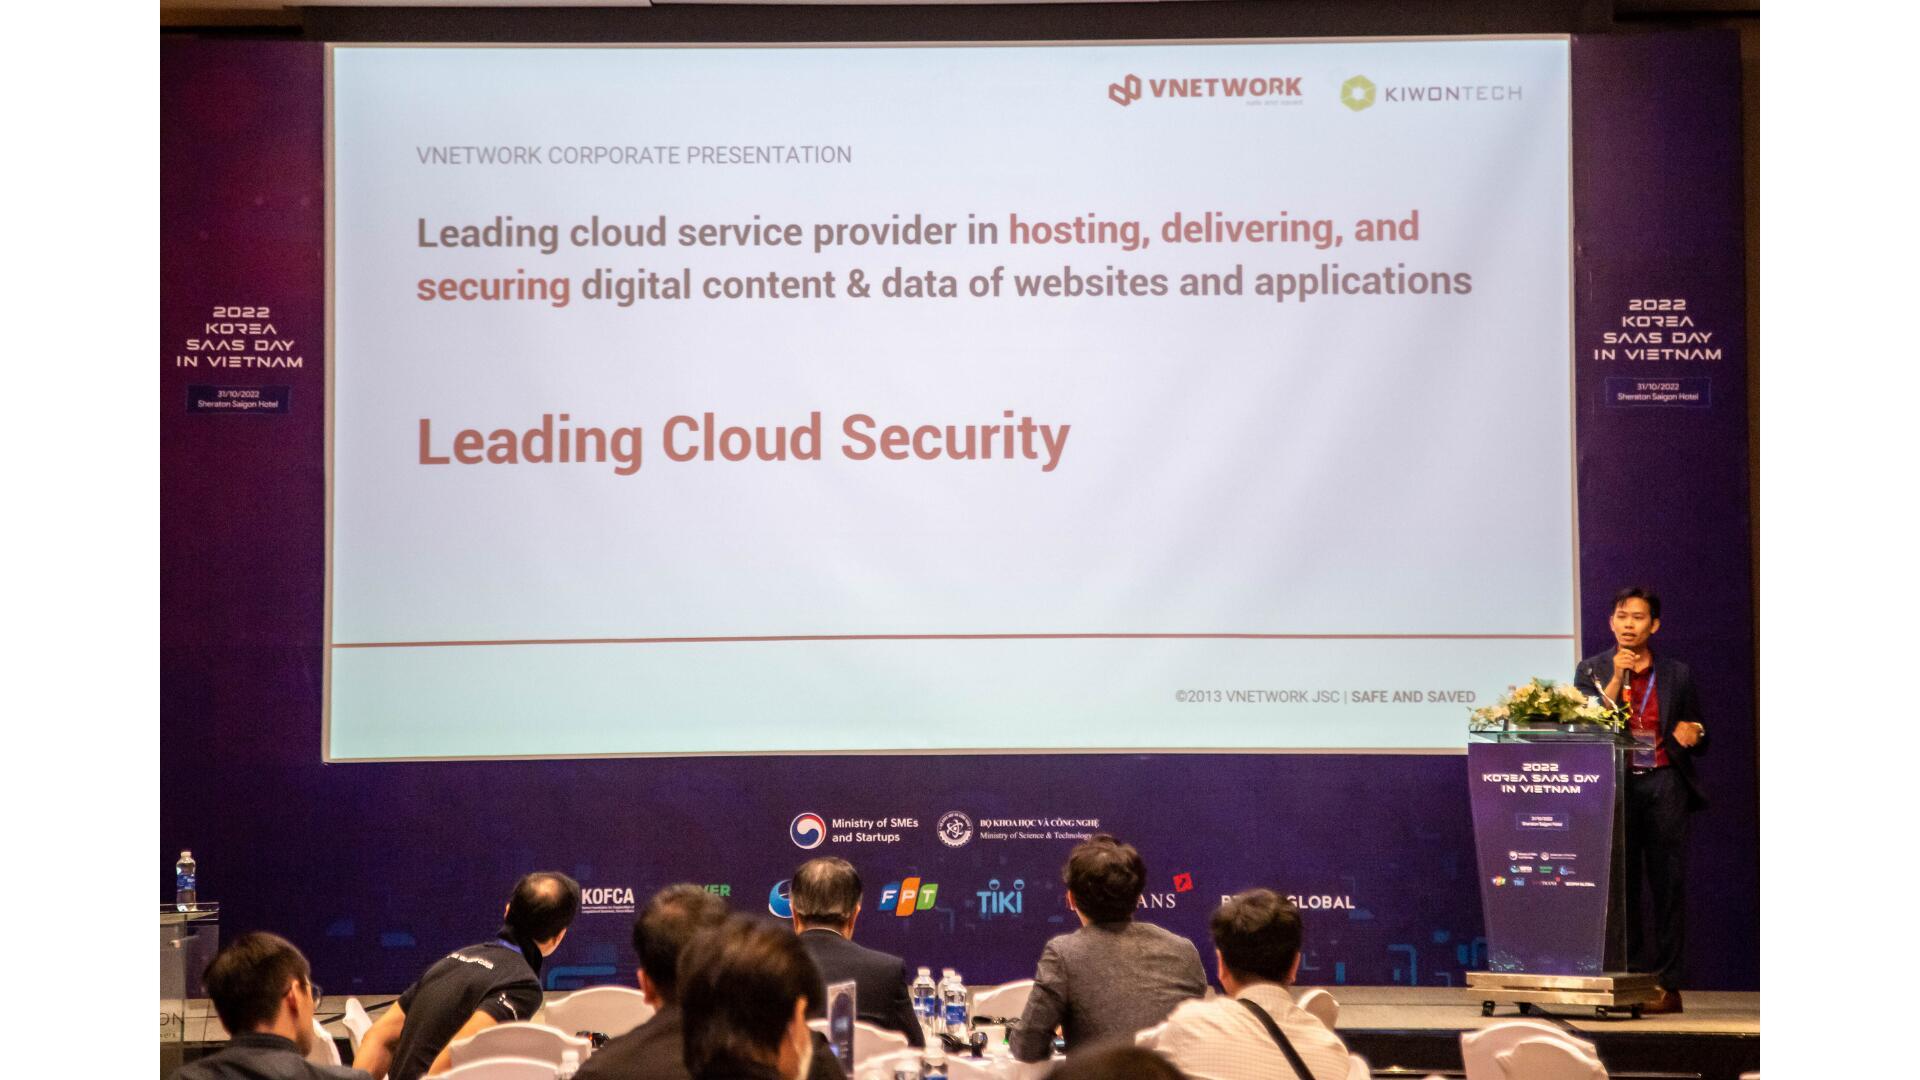 VNETWORK With Top Technology Organizations At 2022 Korea SaaS Day In Vietnam Event